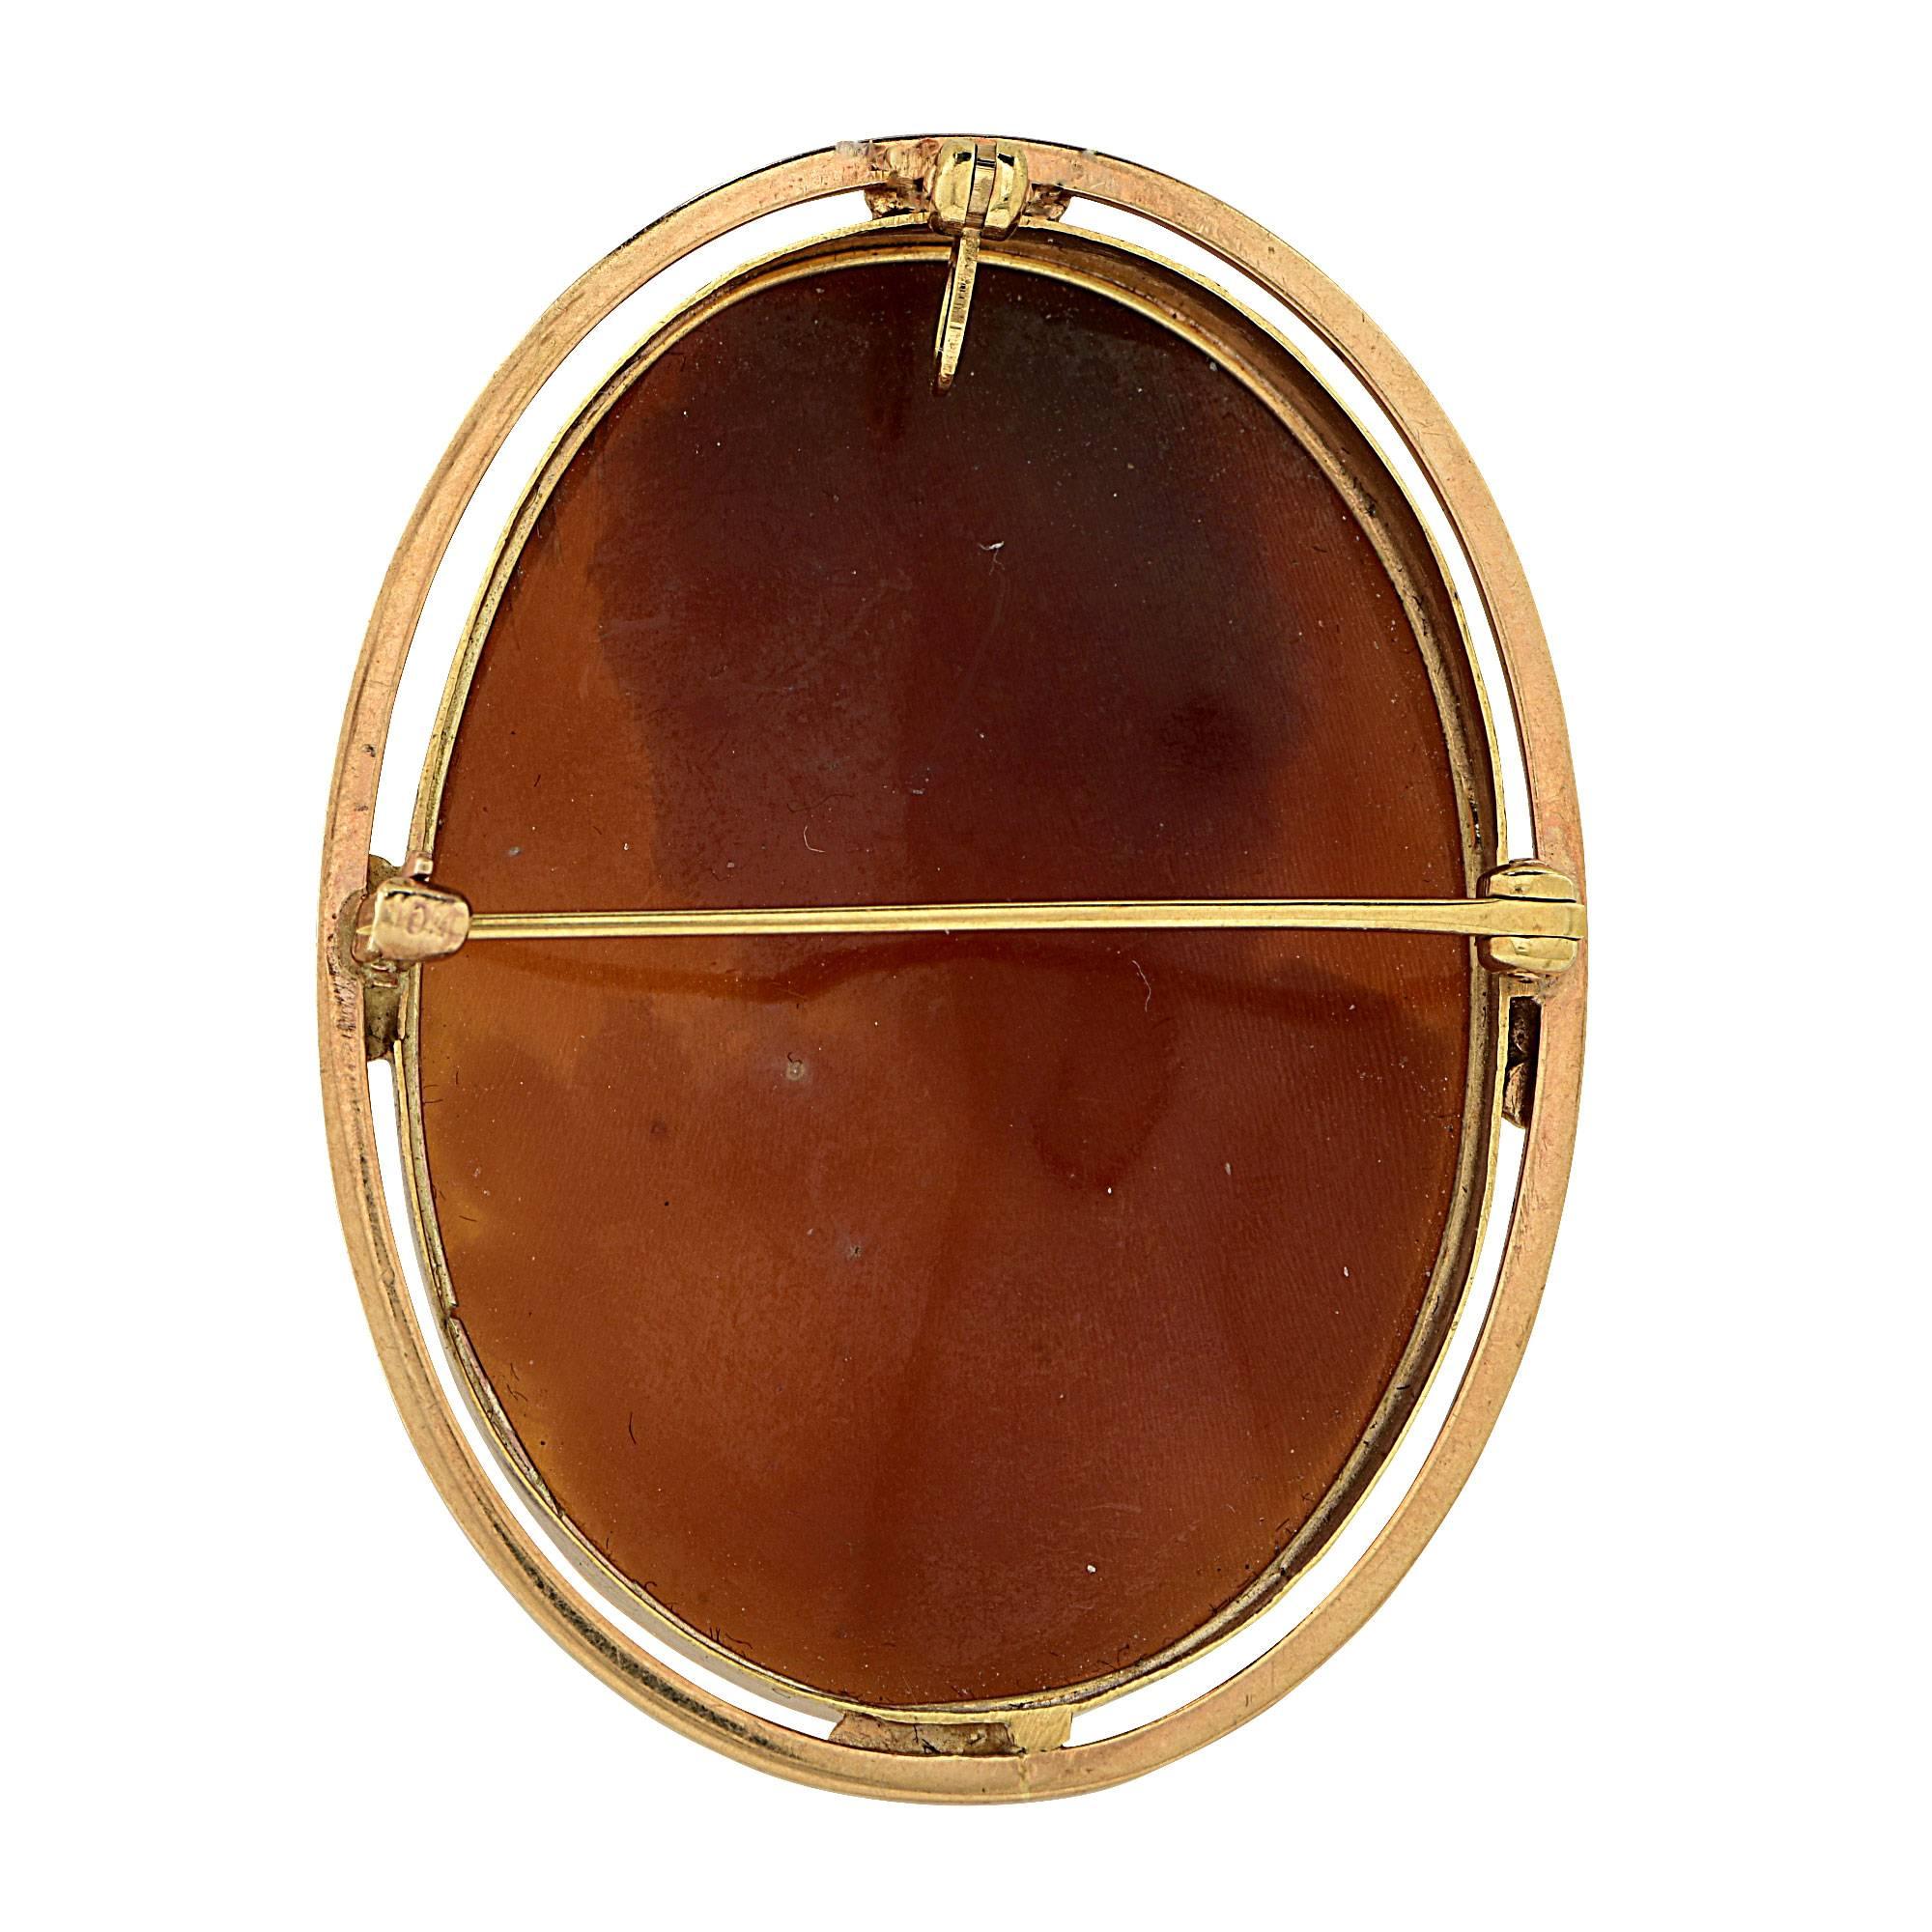 10k yellow gold shell cameo brooch.

Metal weight: 9.01 grams

This shell cameo brooch is accompanied by a retail appraisal performed by a GIA Graduate Gemologist.